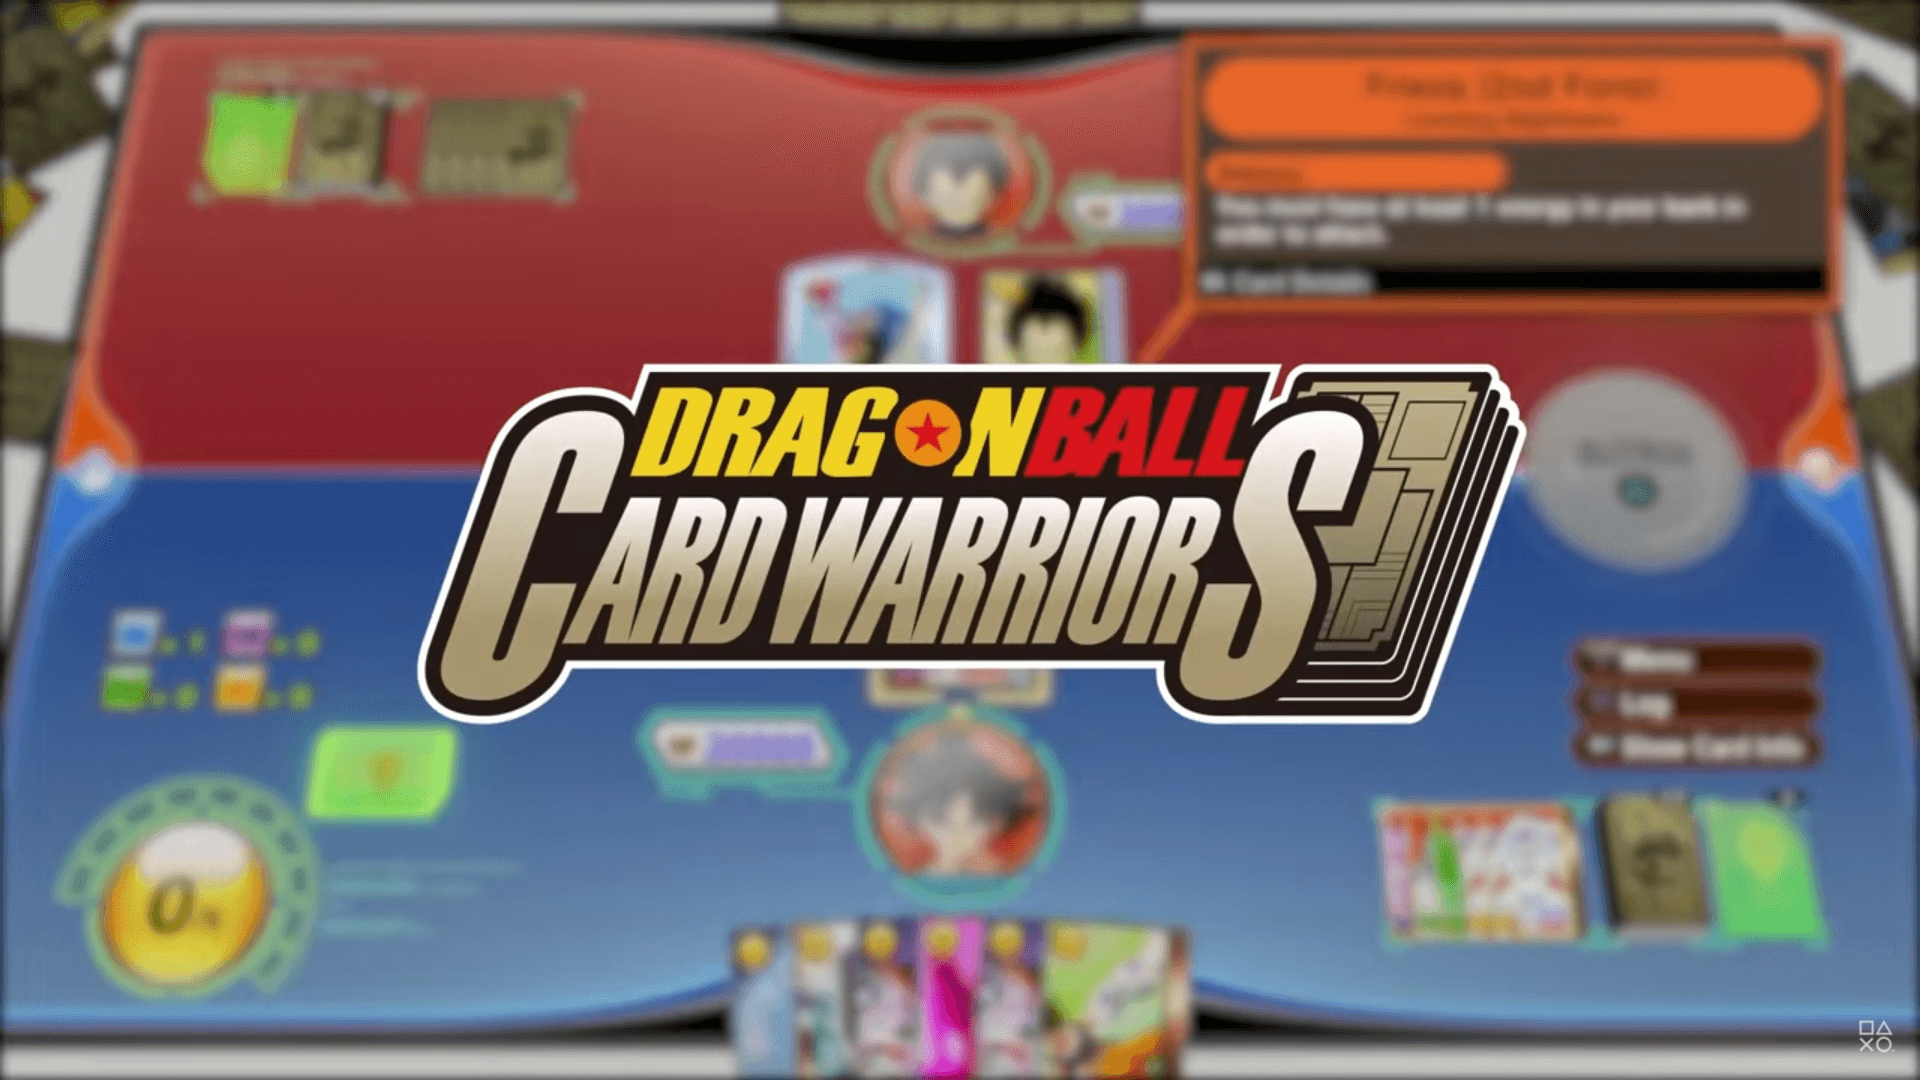 DragonBall Z: Kakarot is Adding a Free Card Game Update